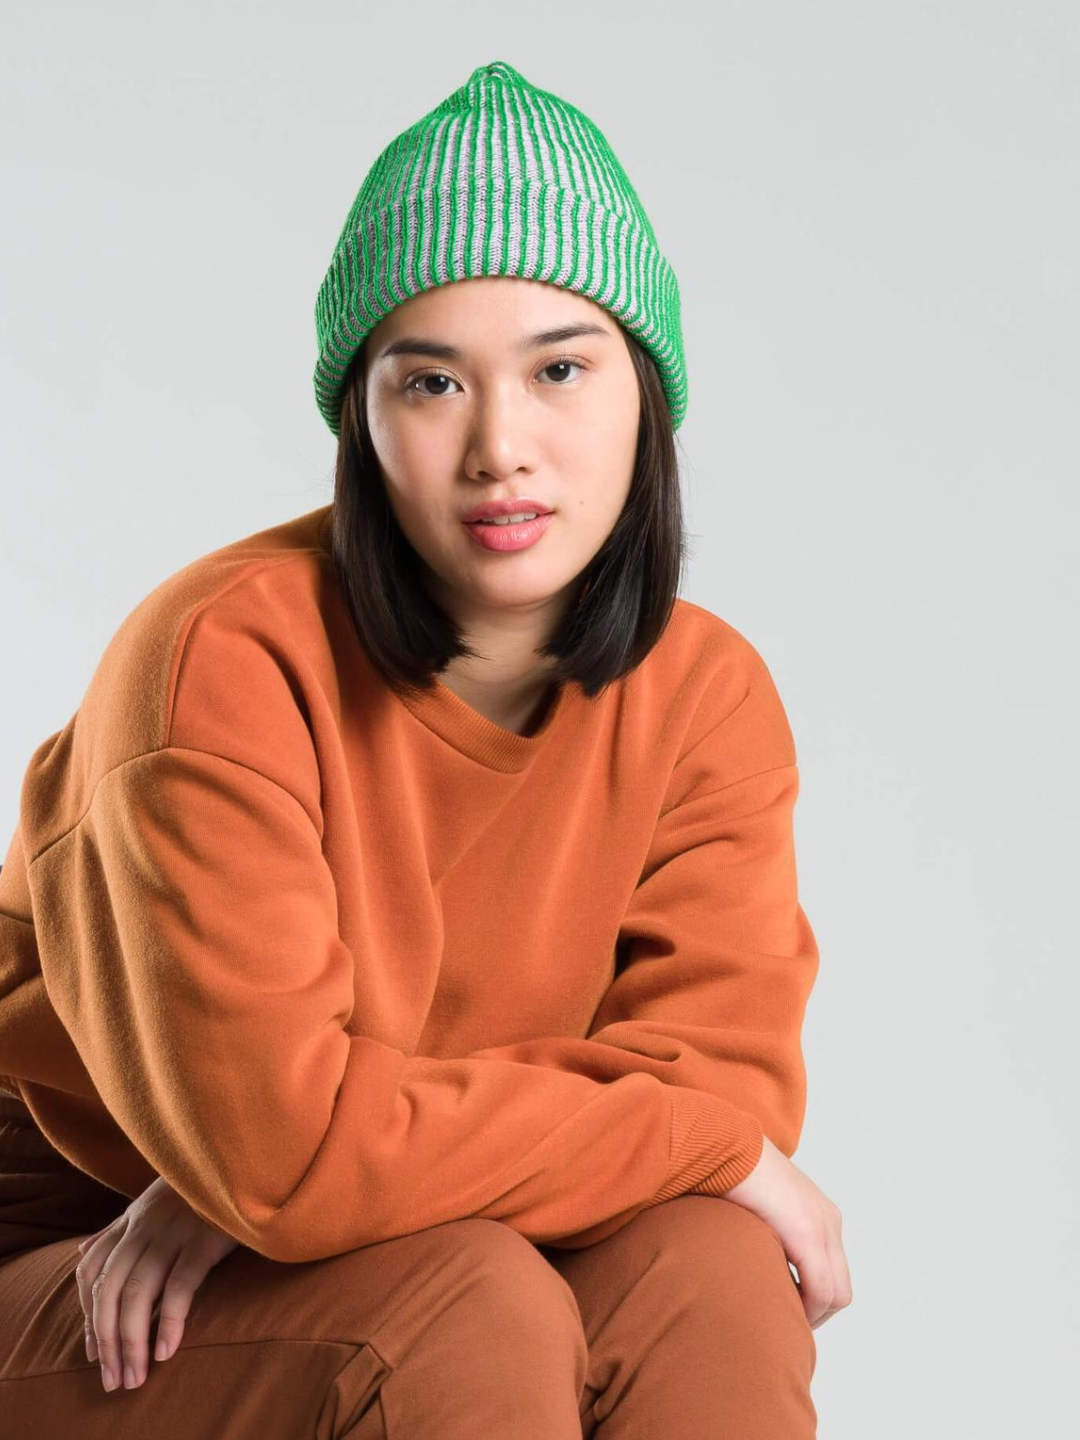 A woman wearing a kelly green ribbed beanie for big kids and adults, with a ribbed cuff. The ribbed texture reveals a second yarn color that's light purple. She is wearing a rust orange sweatshirt and pants, and is seated in front of a grey wall.